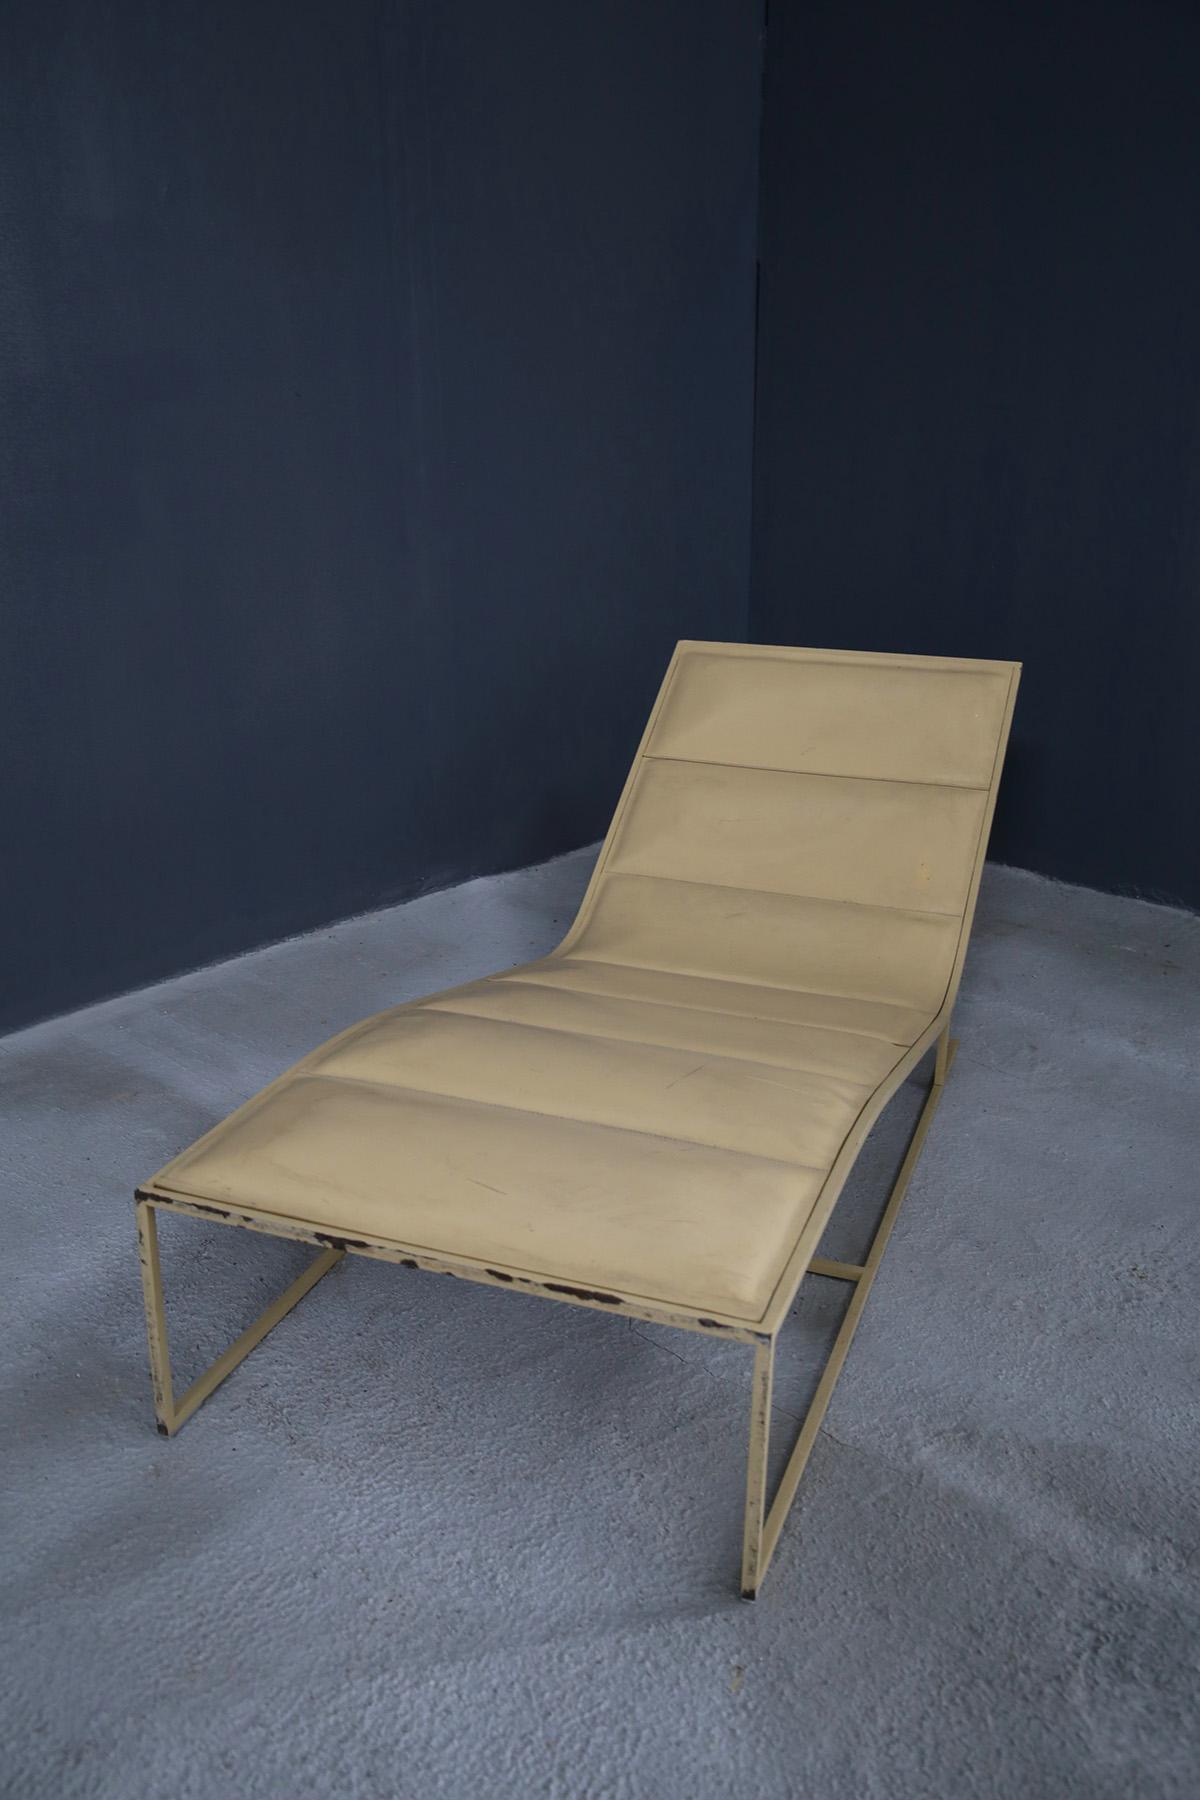 Elegant and modern chaise lounge of French manufacture. The structure of the seat is in tubular lacquered iron, while the entire seat is in cream-colored imitation leather.
The seat is in good vintage condition but has the lacquer of scratches and